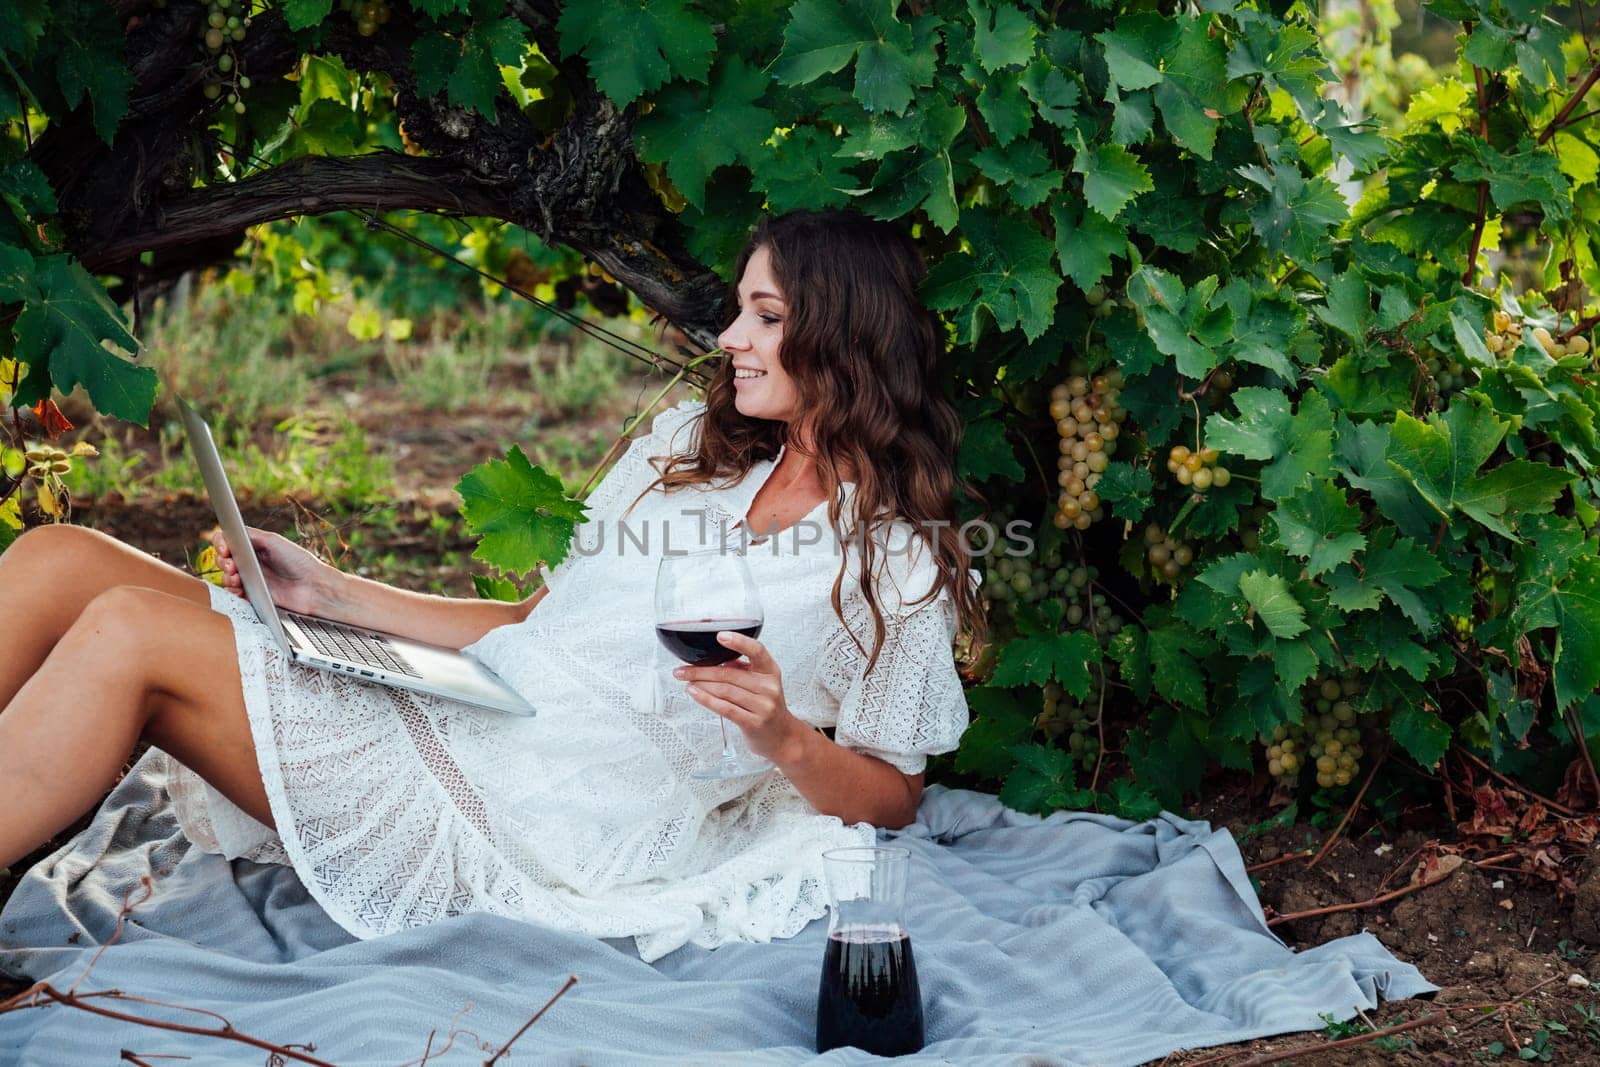 a woman sits on a mat in grape leaves with a glass of wine